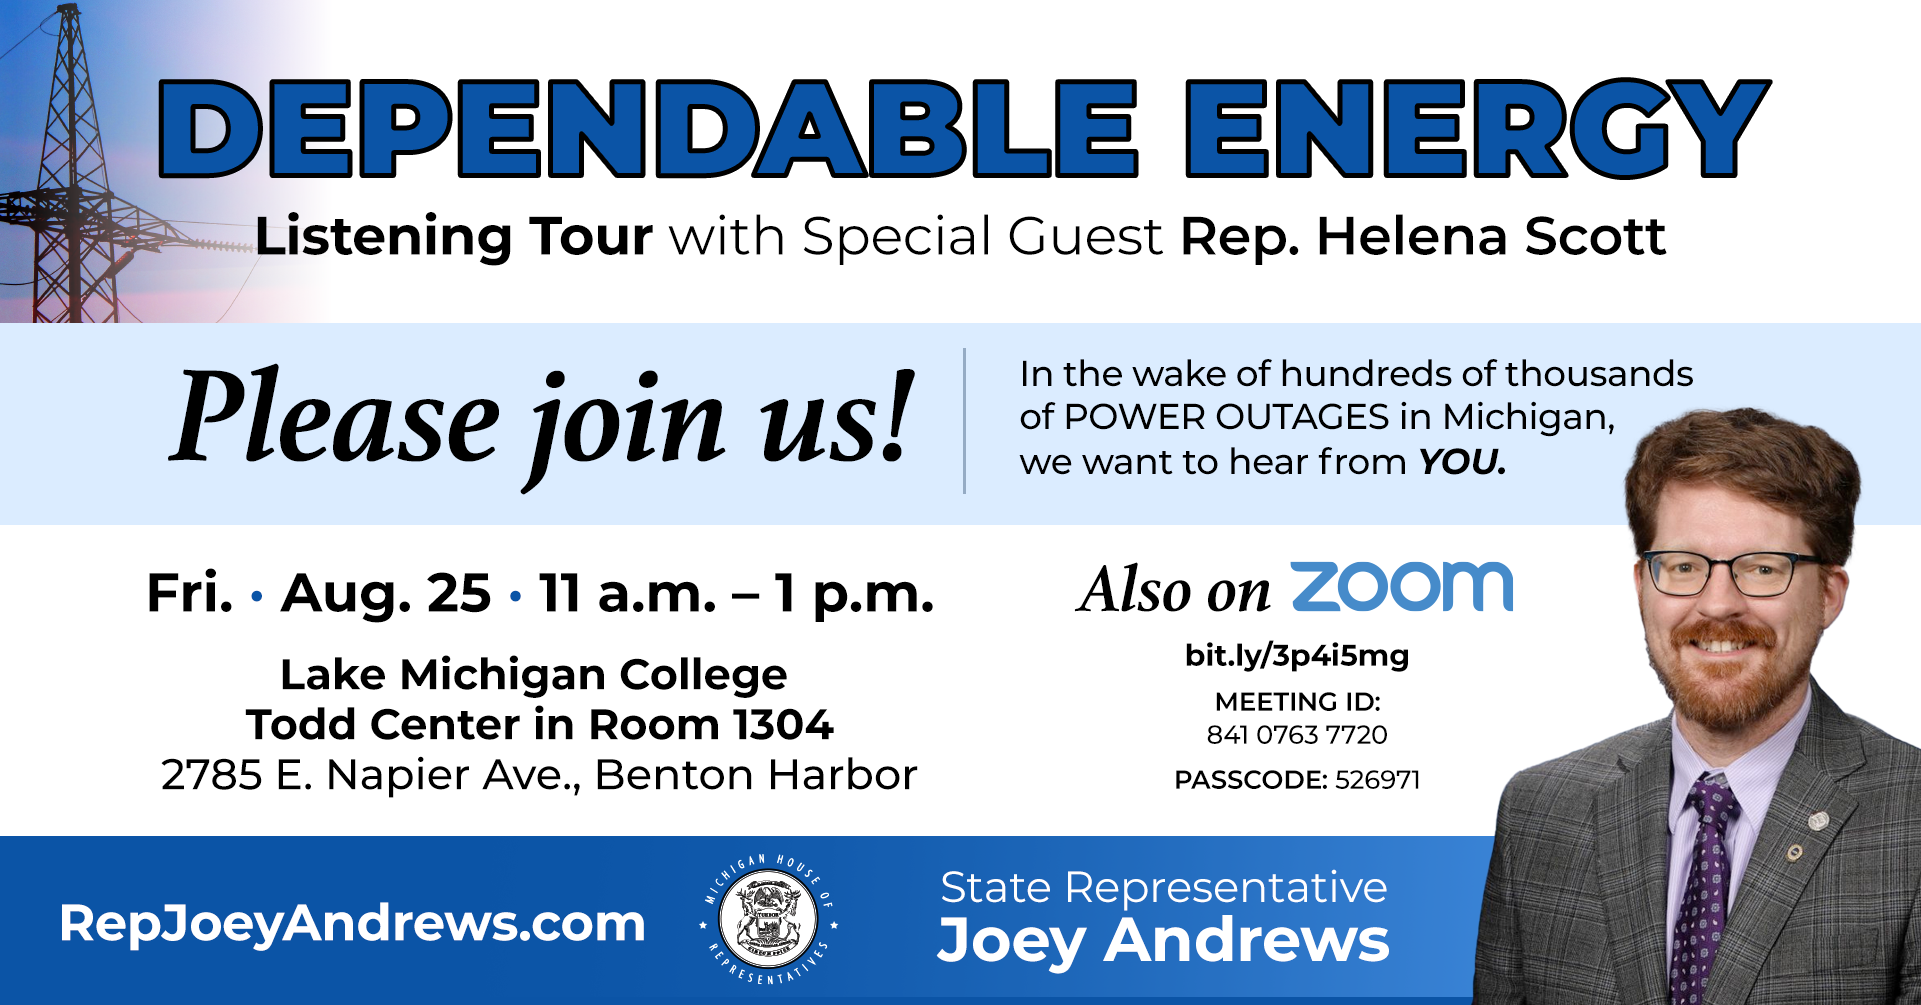 Rep. Andrews' Dependable Energy Listening Tour